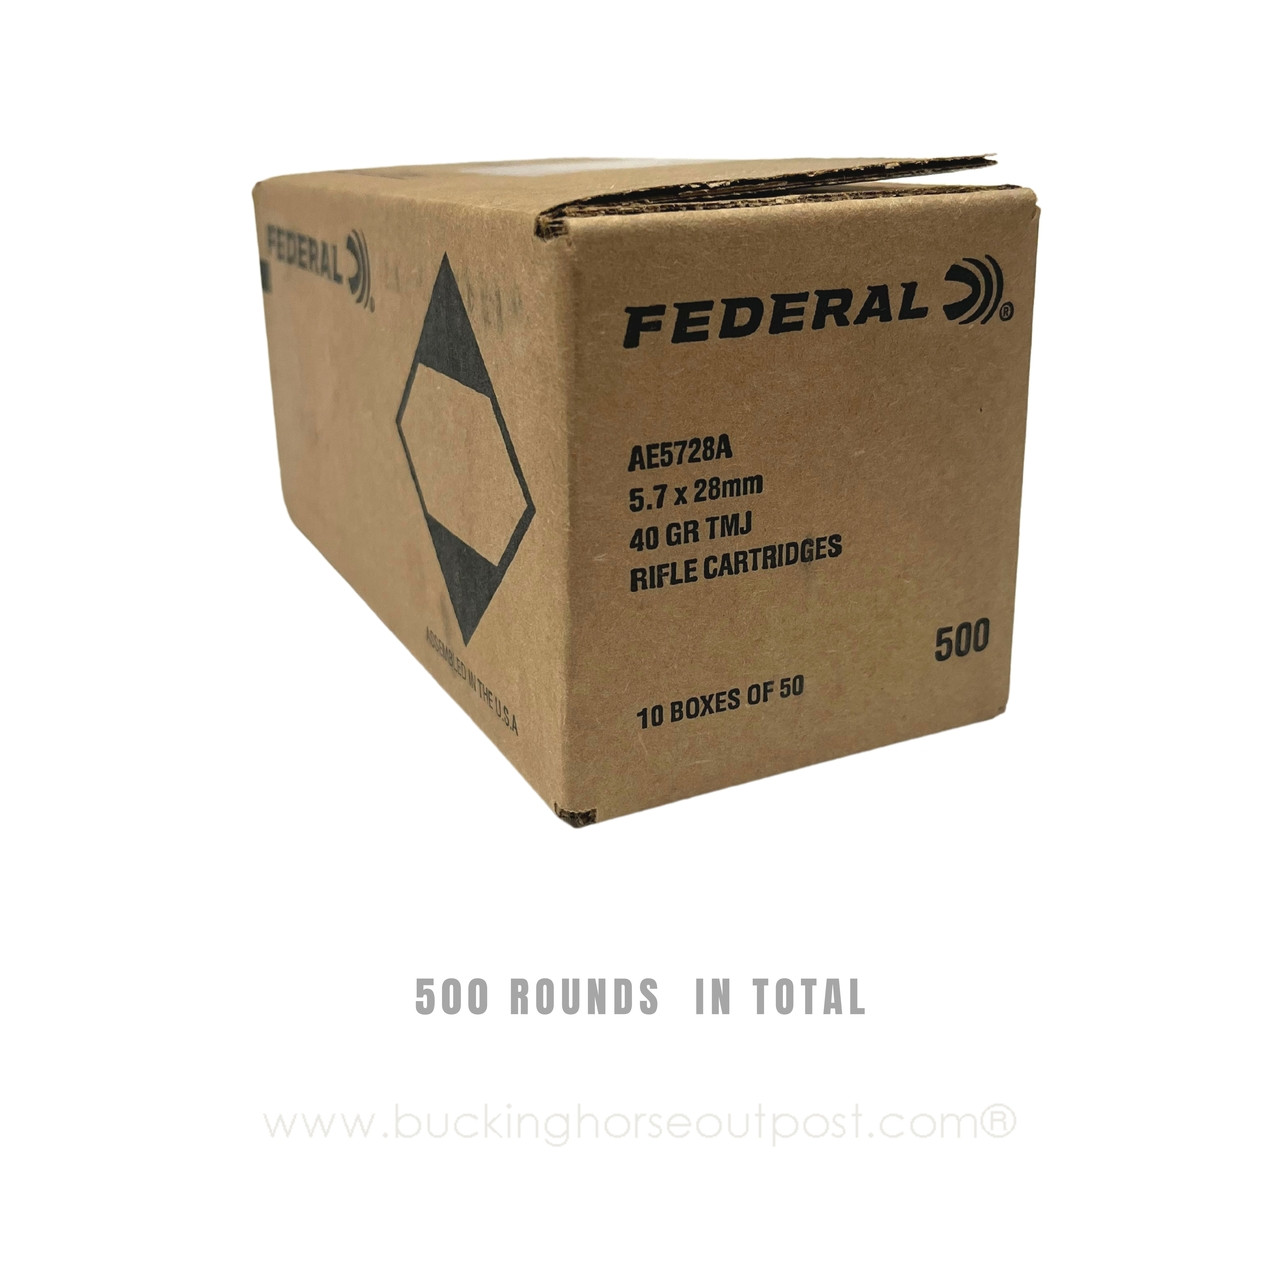 Federal American Eagle 5.7x28mm 40 Grain Full Metal Jacket 500rds Per Case (AE5728A)- FREE SHIPPING ON ORDERS $175 OR MORE